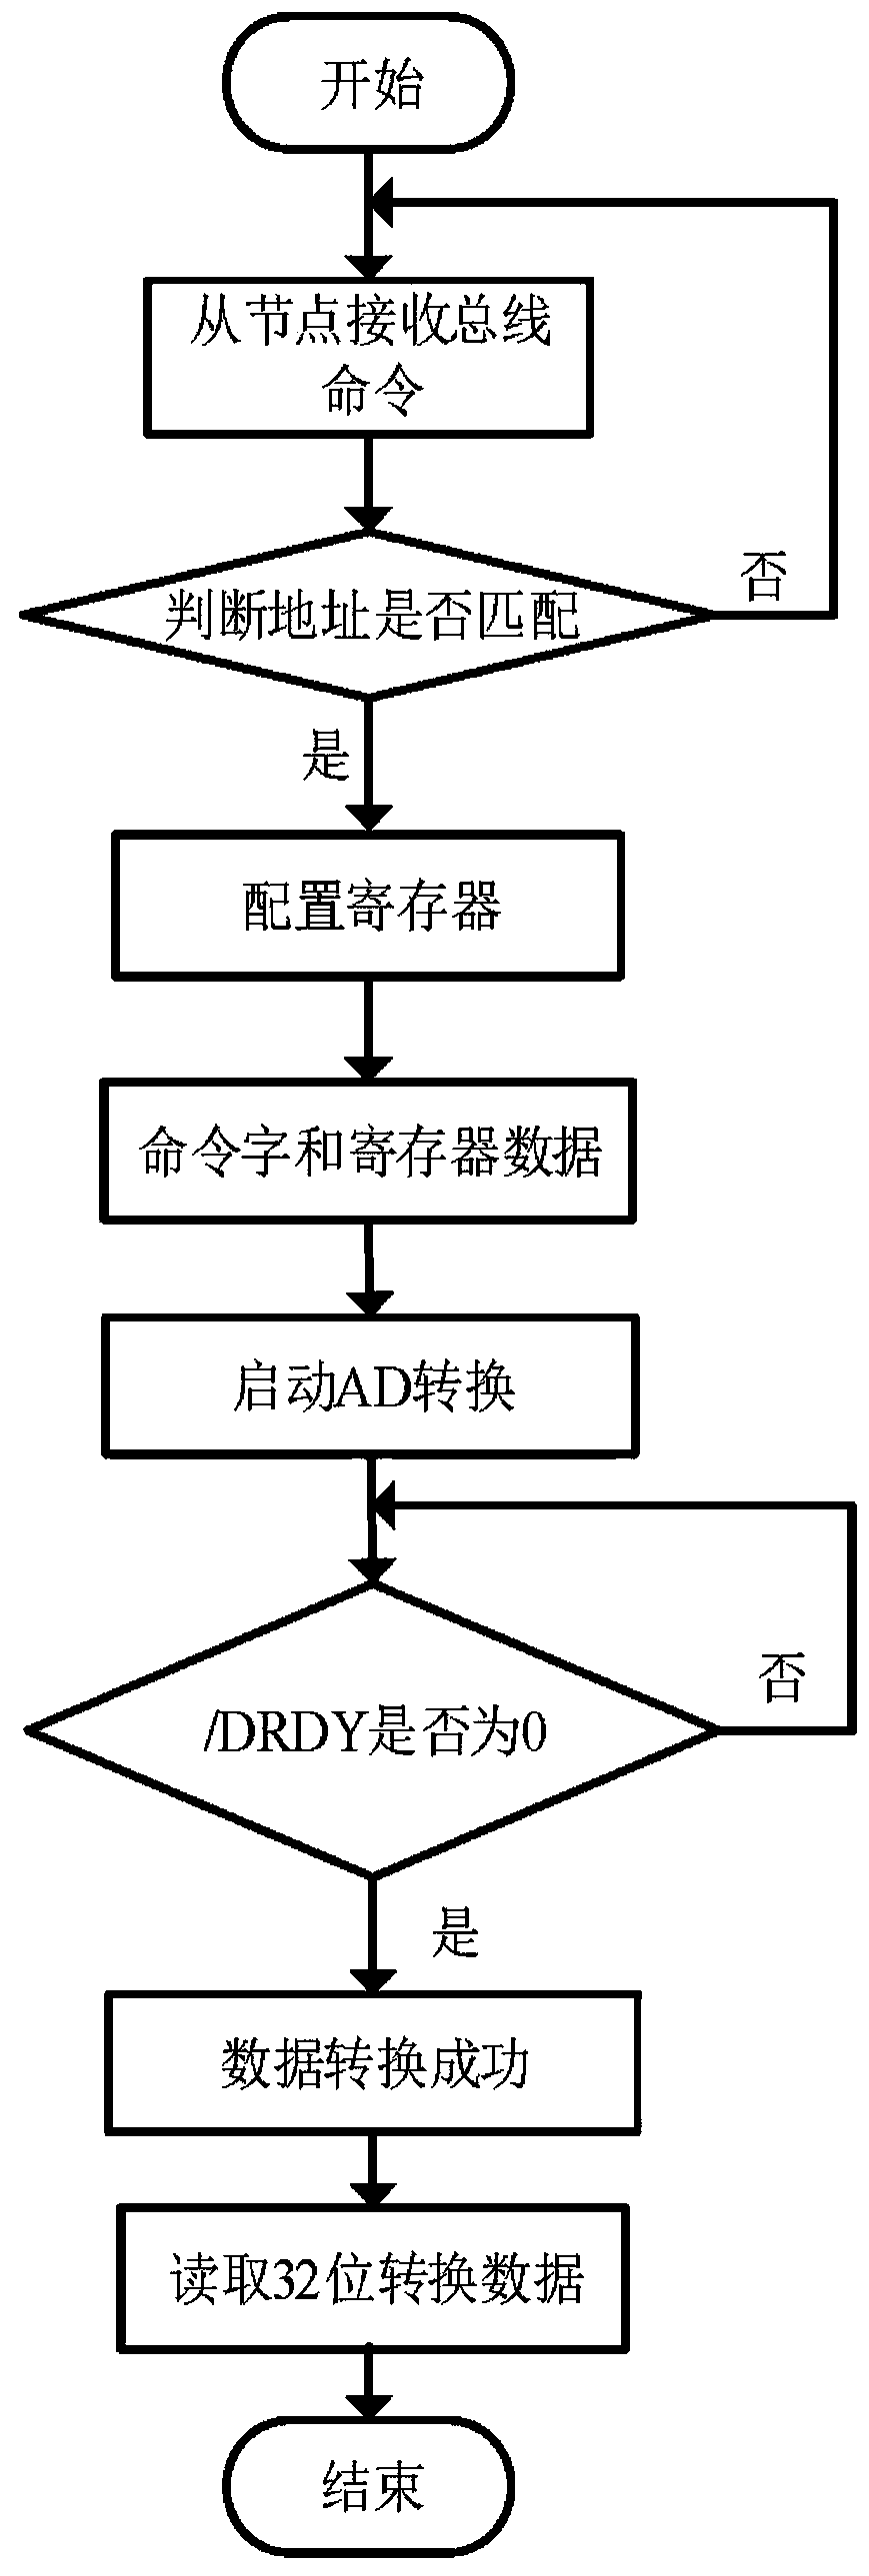 Data collecting and editing system